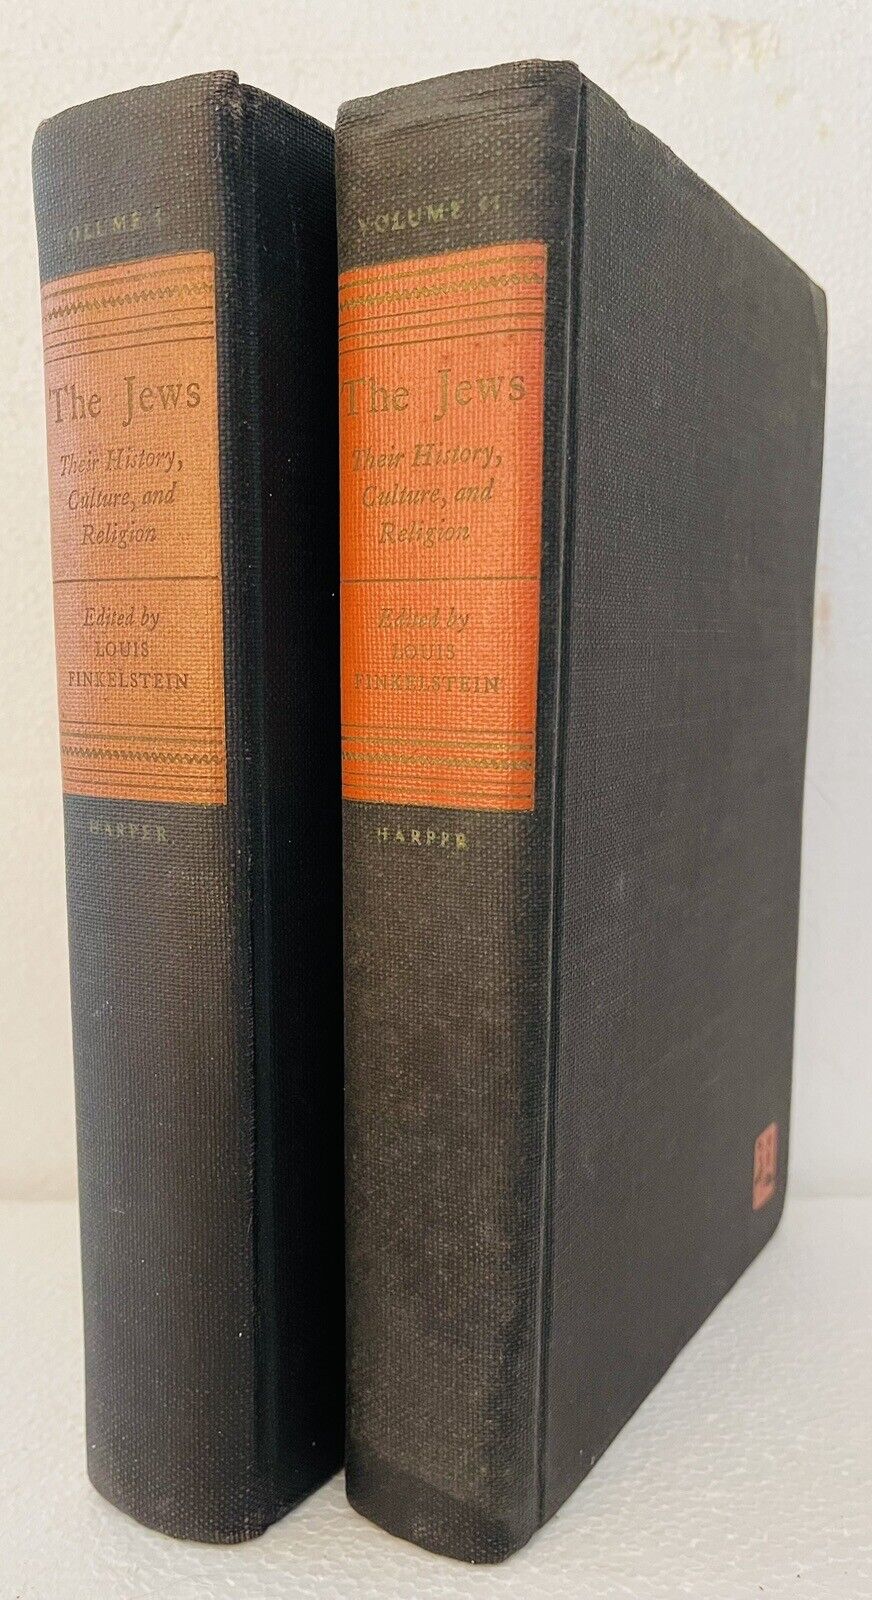 The Jews Their History Culture & Religion by Finkelstein Vols I & II 1st Ed 1949